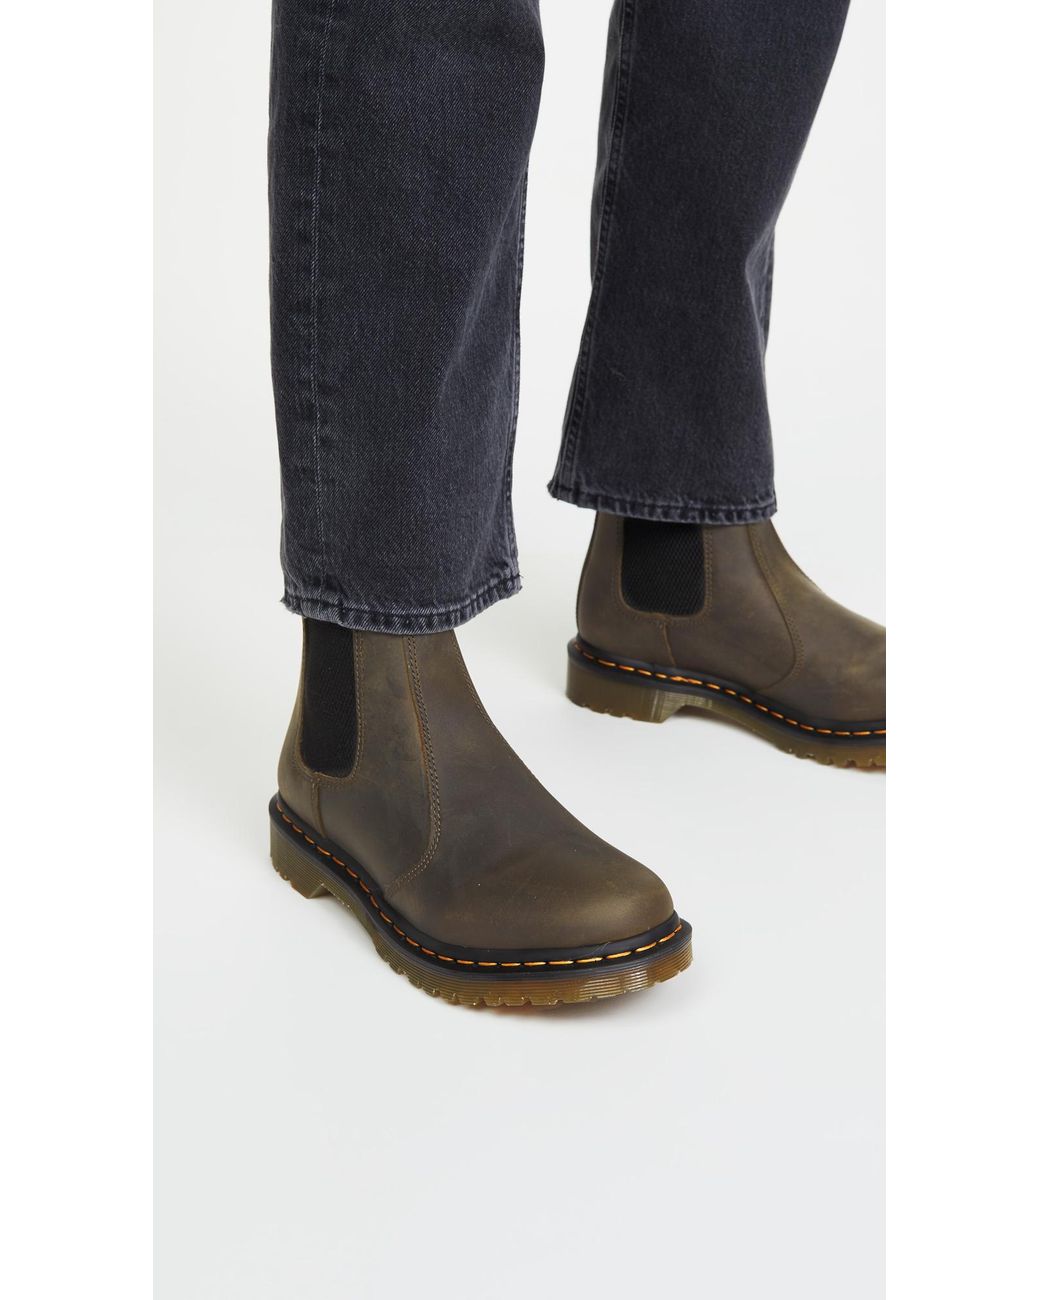 Dr. Martens 2976 Leonore Chelsea Boots in Olive (Green) | Lyst